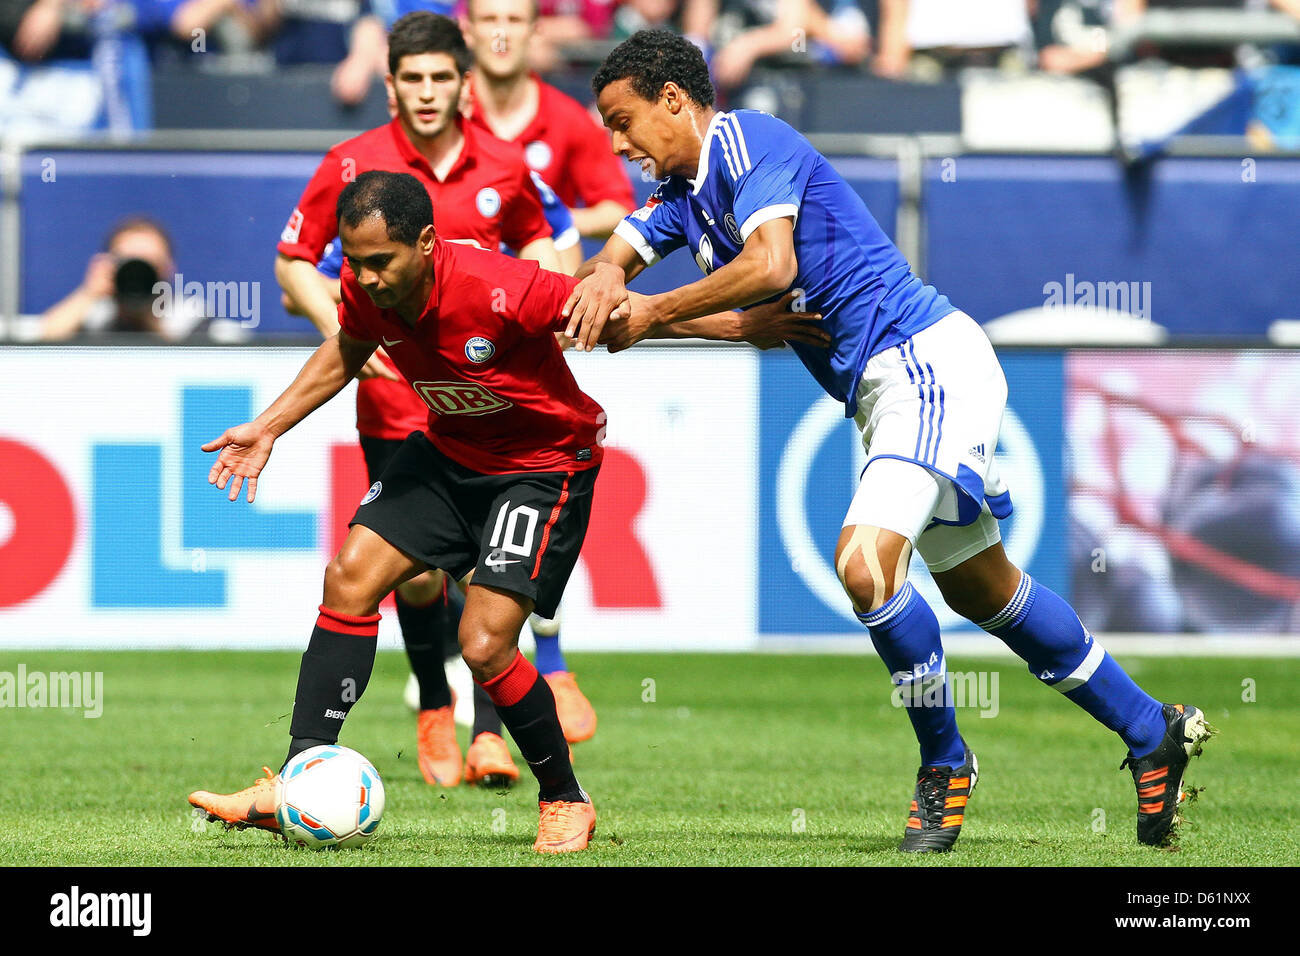 Berlin's Raffael vies for the ball with Schlake's Joel Matip during the Bundesliga soccer match between FC Schalke 04 and Hertha BSC at Veltins-Arena in Gelsenkirchen, Germany, 28 April 2012. Photo: KEVIN KUREK (ATTENTION: EMBARGO CONDITIONS! The DFL permits the further utilisation of the pictures in IPTV, mobile services and other new technologies only no earlier than two hours af Stock Photo